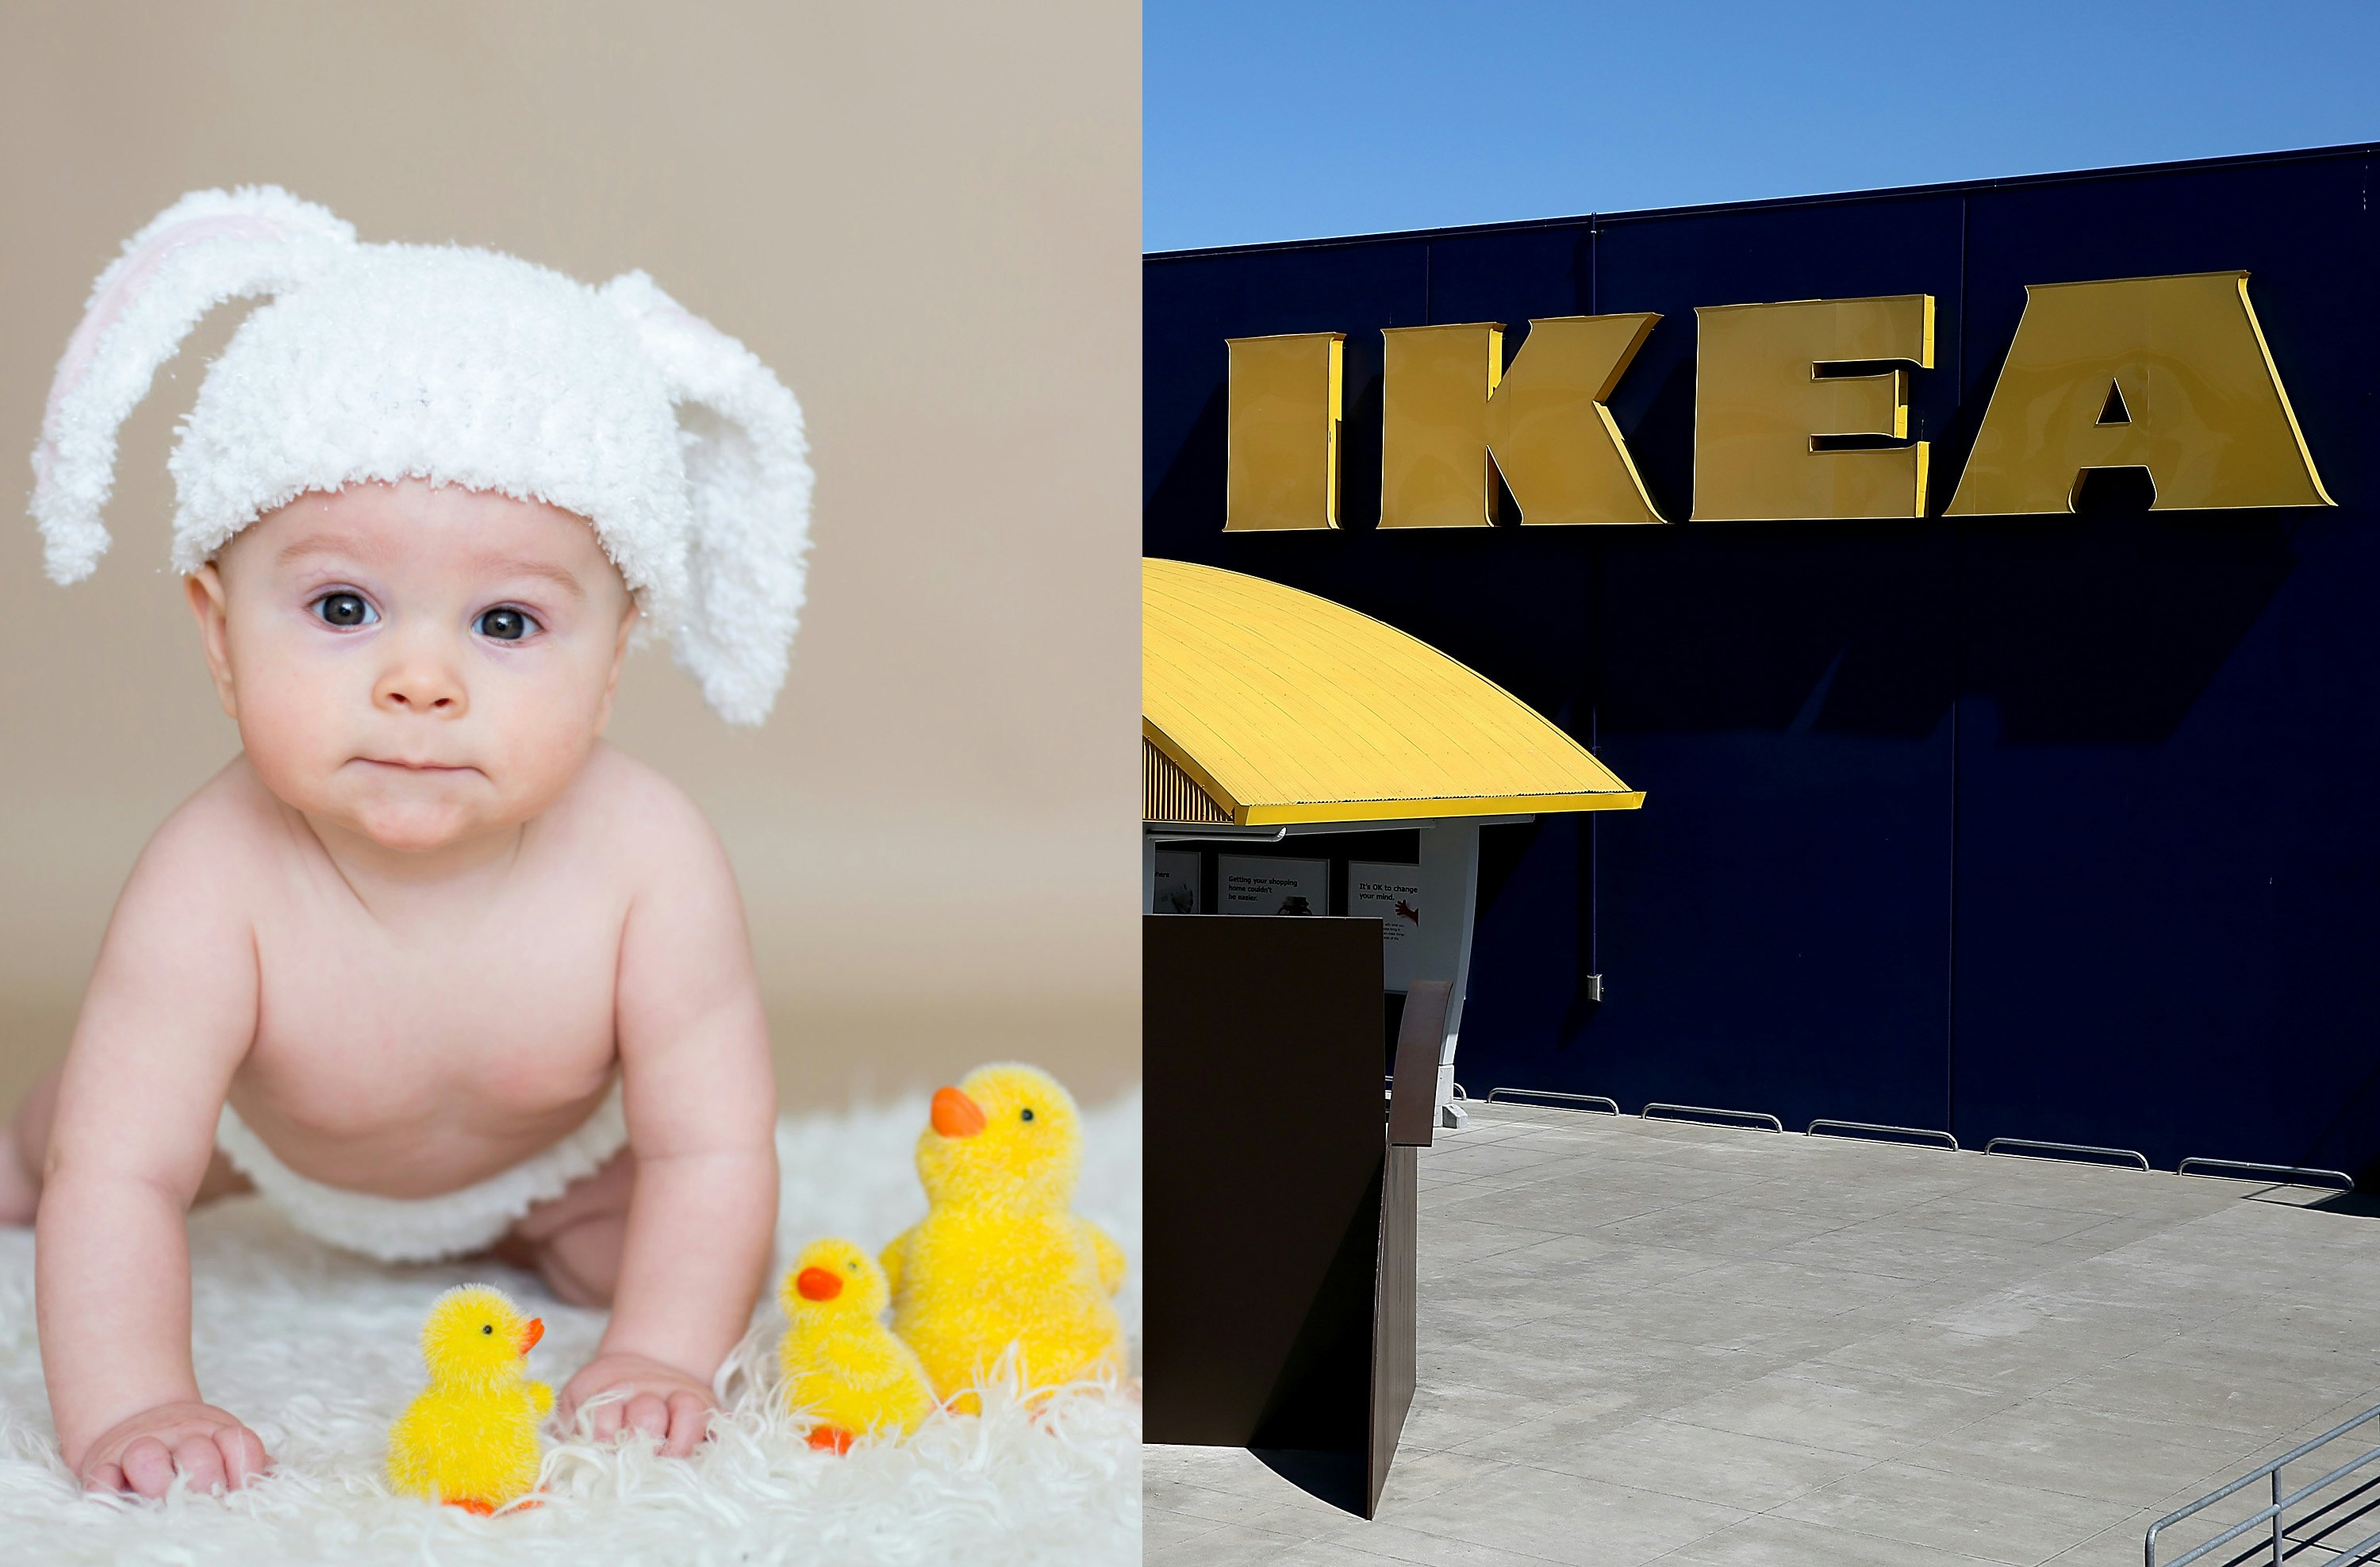 Ikea Inspired Baby Names Are A Thing Tbh They Re Not Half Bad